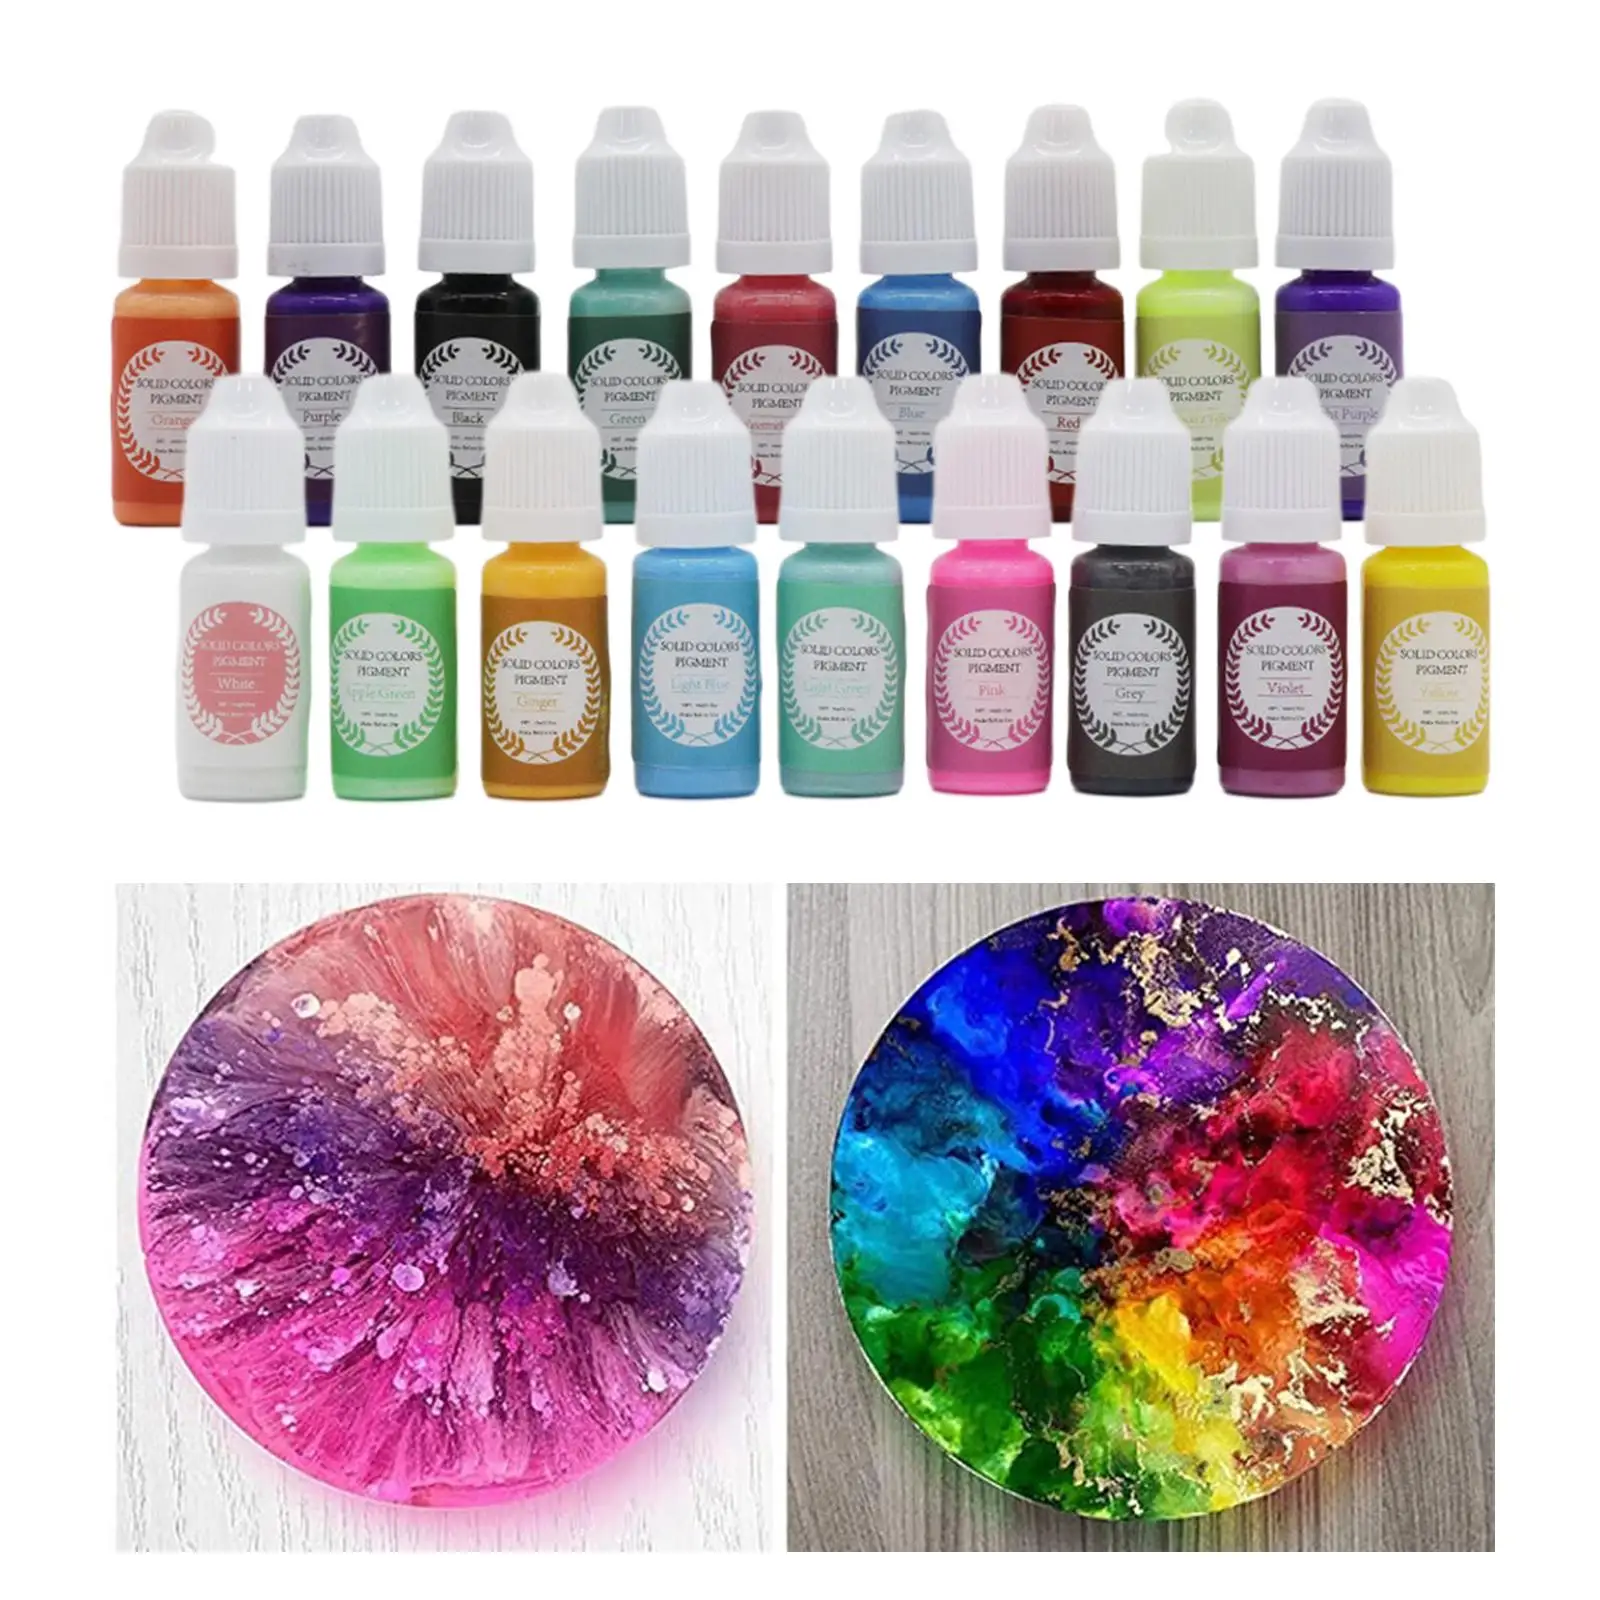 Alcohol Ink Set - 18 Vibrant Colors Alcohol Based Ink, Concentrated Epoxy Resin Paint Colour Dye, for Epoxy Resin Handmade Art